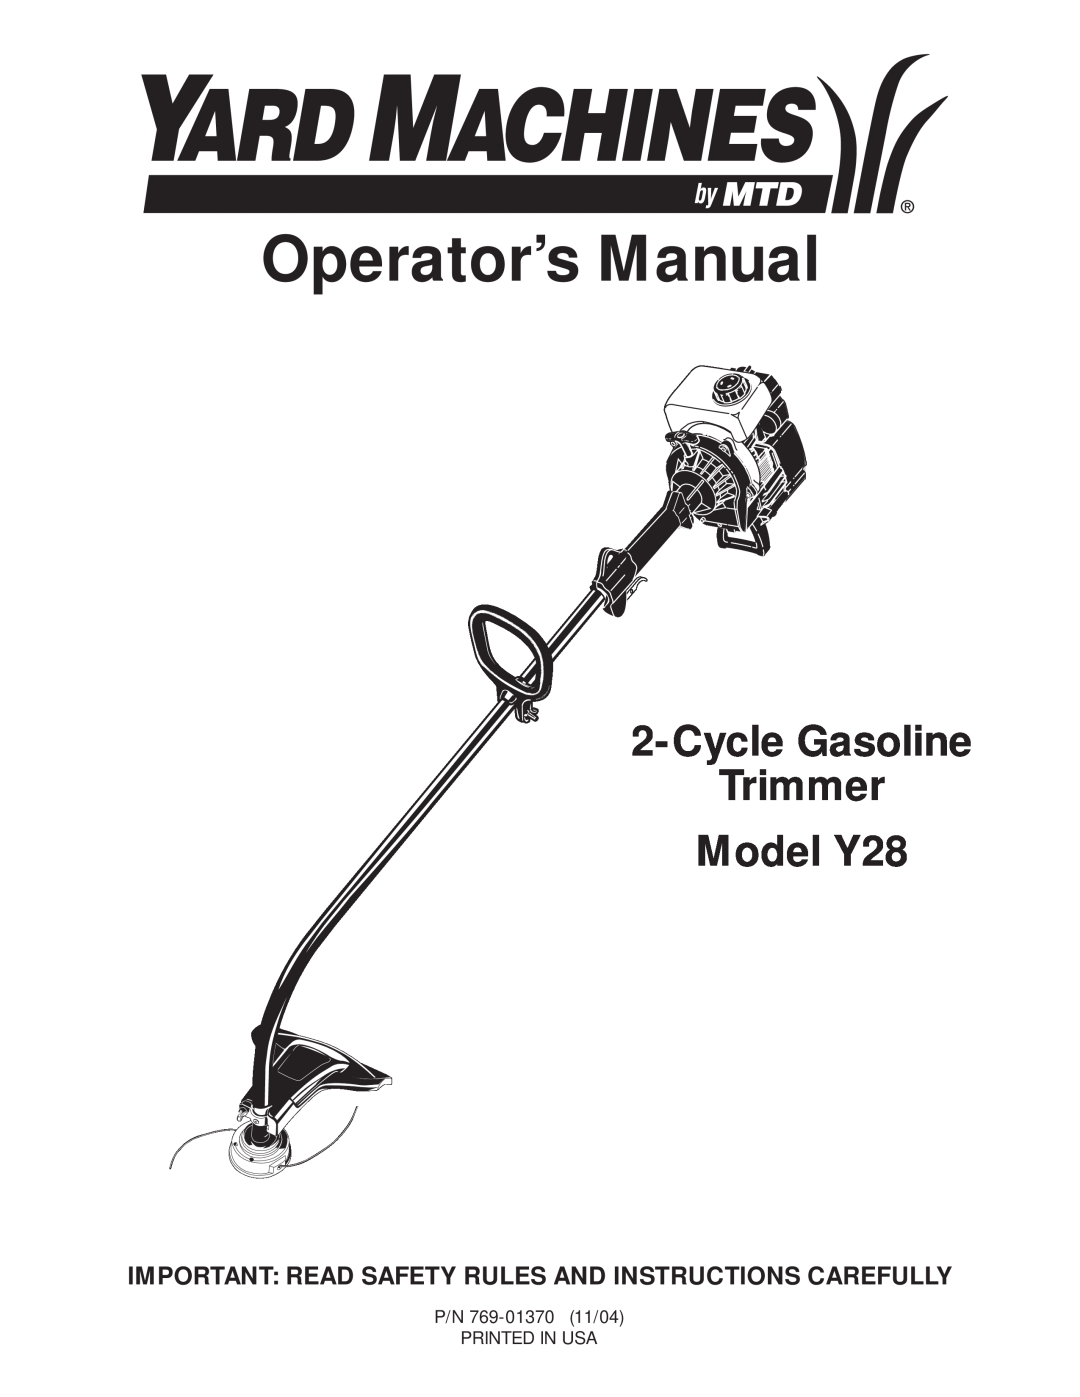 MTD manual Operator’s Manual, Cycle Gasoline Trimmer Model Y28, Important Read Safety Rules And Instructions Carefully 